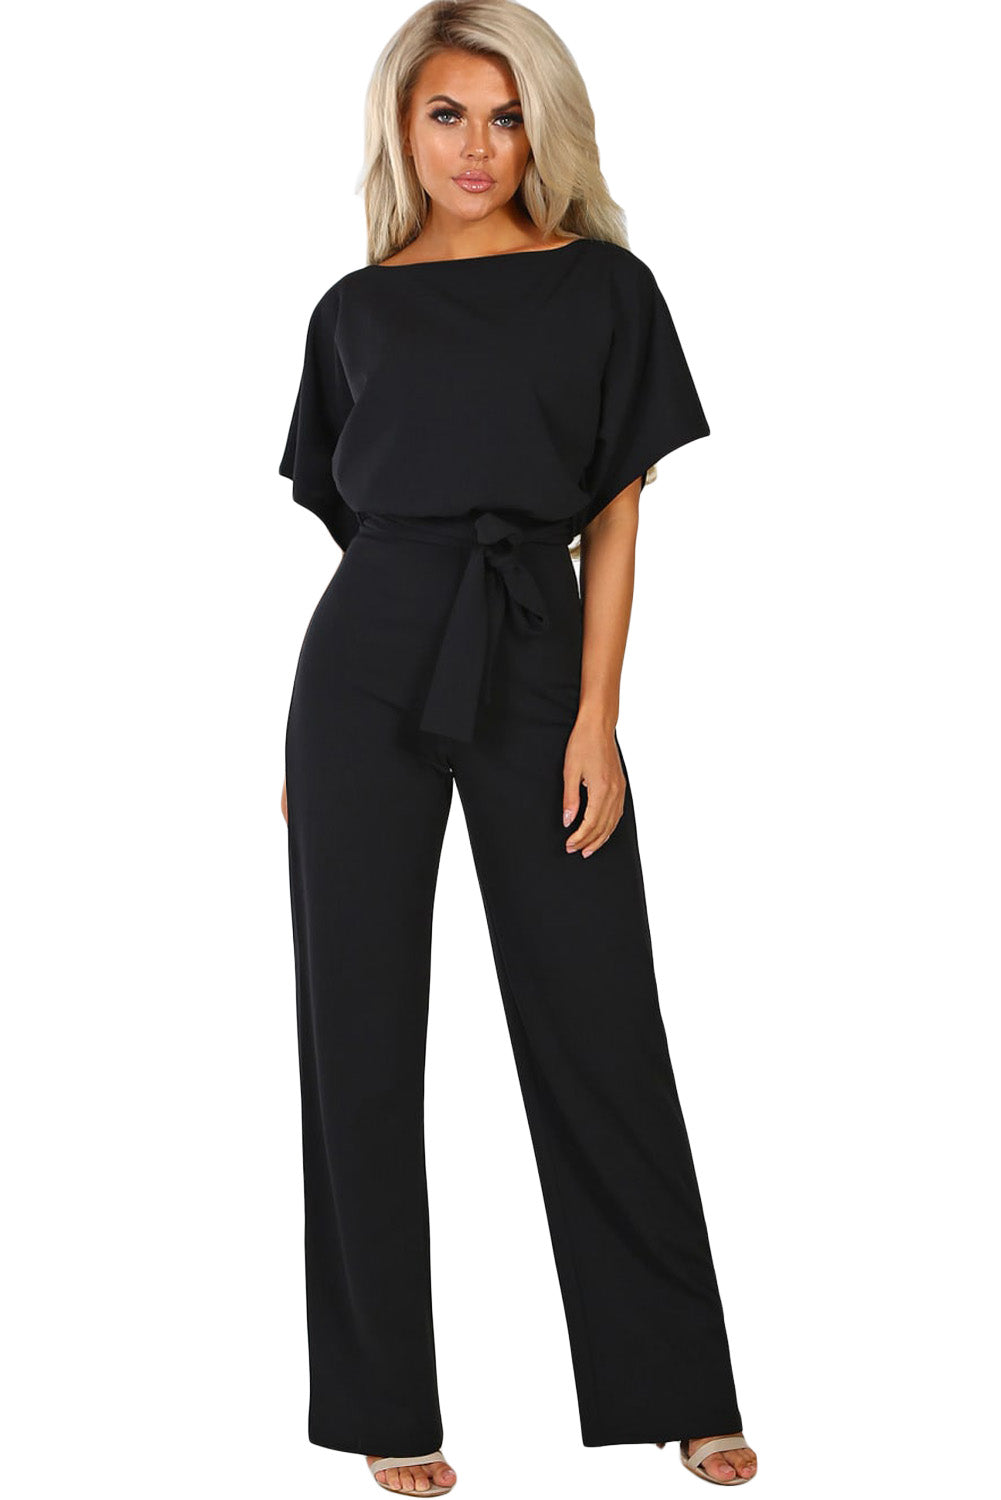 Oh So Glam Belted Wide Leg Jumpsuit ( Apricot, Black, Blue, Brown)